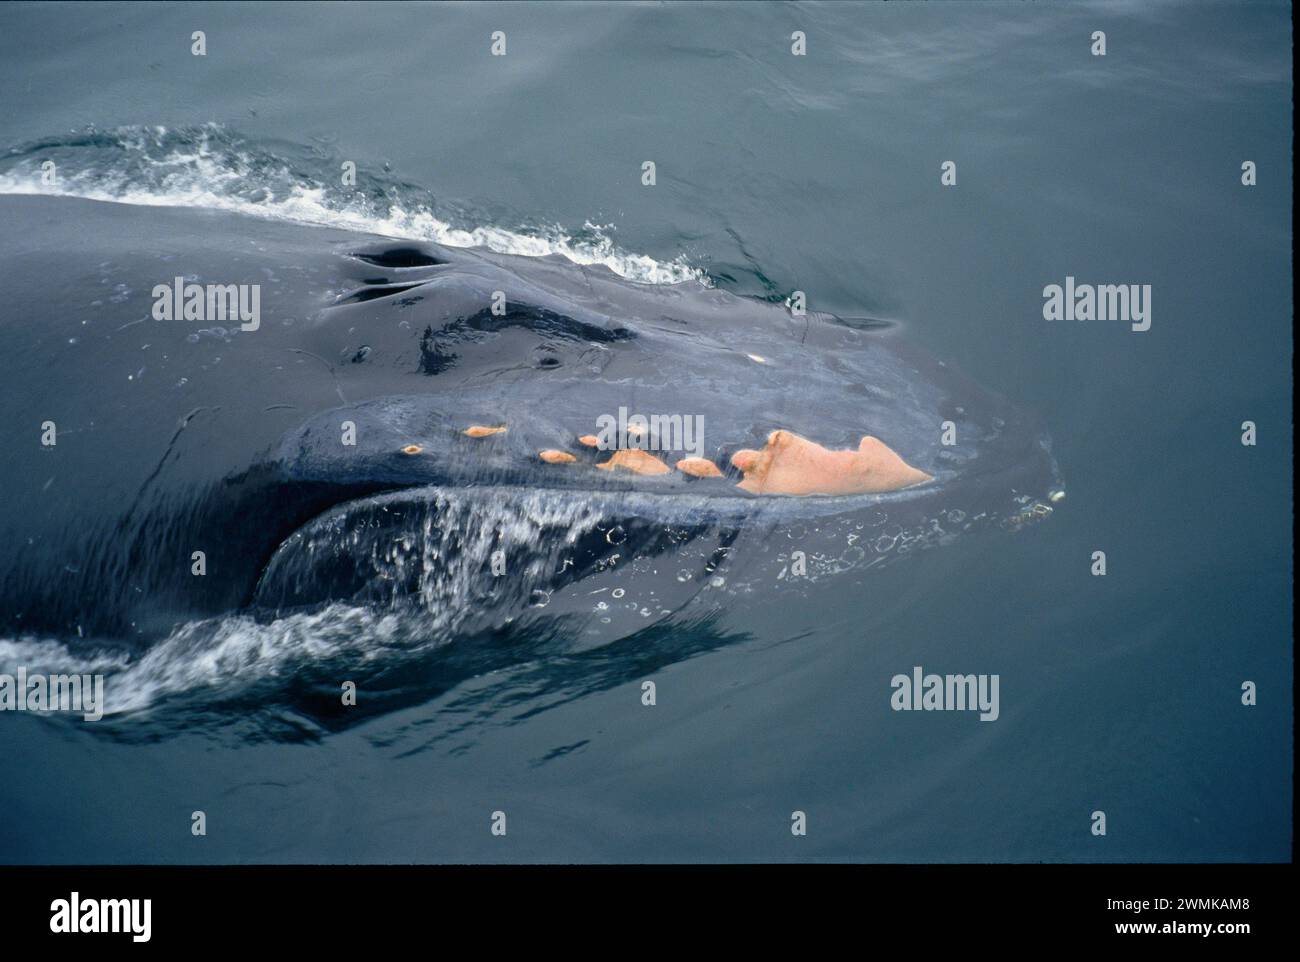 Humpback whale (Megaptera novaeangliae) on the water's surface; Maine, United States of America Stock Photo